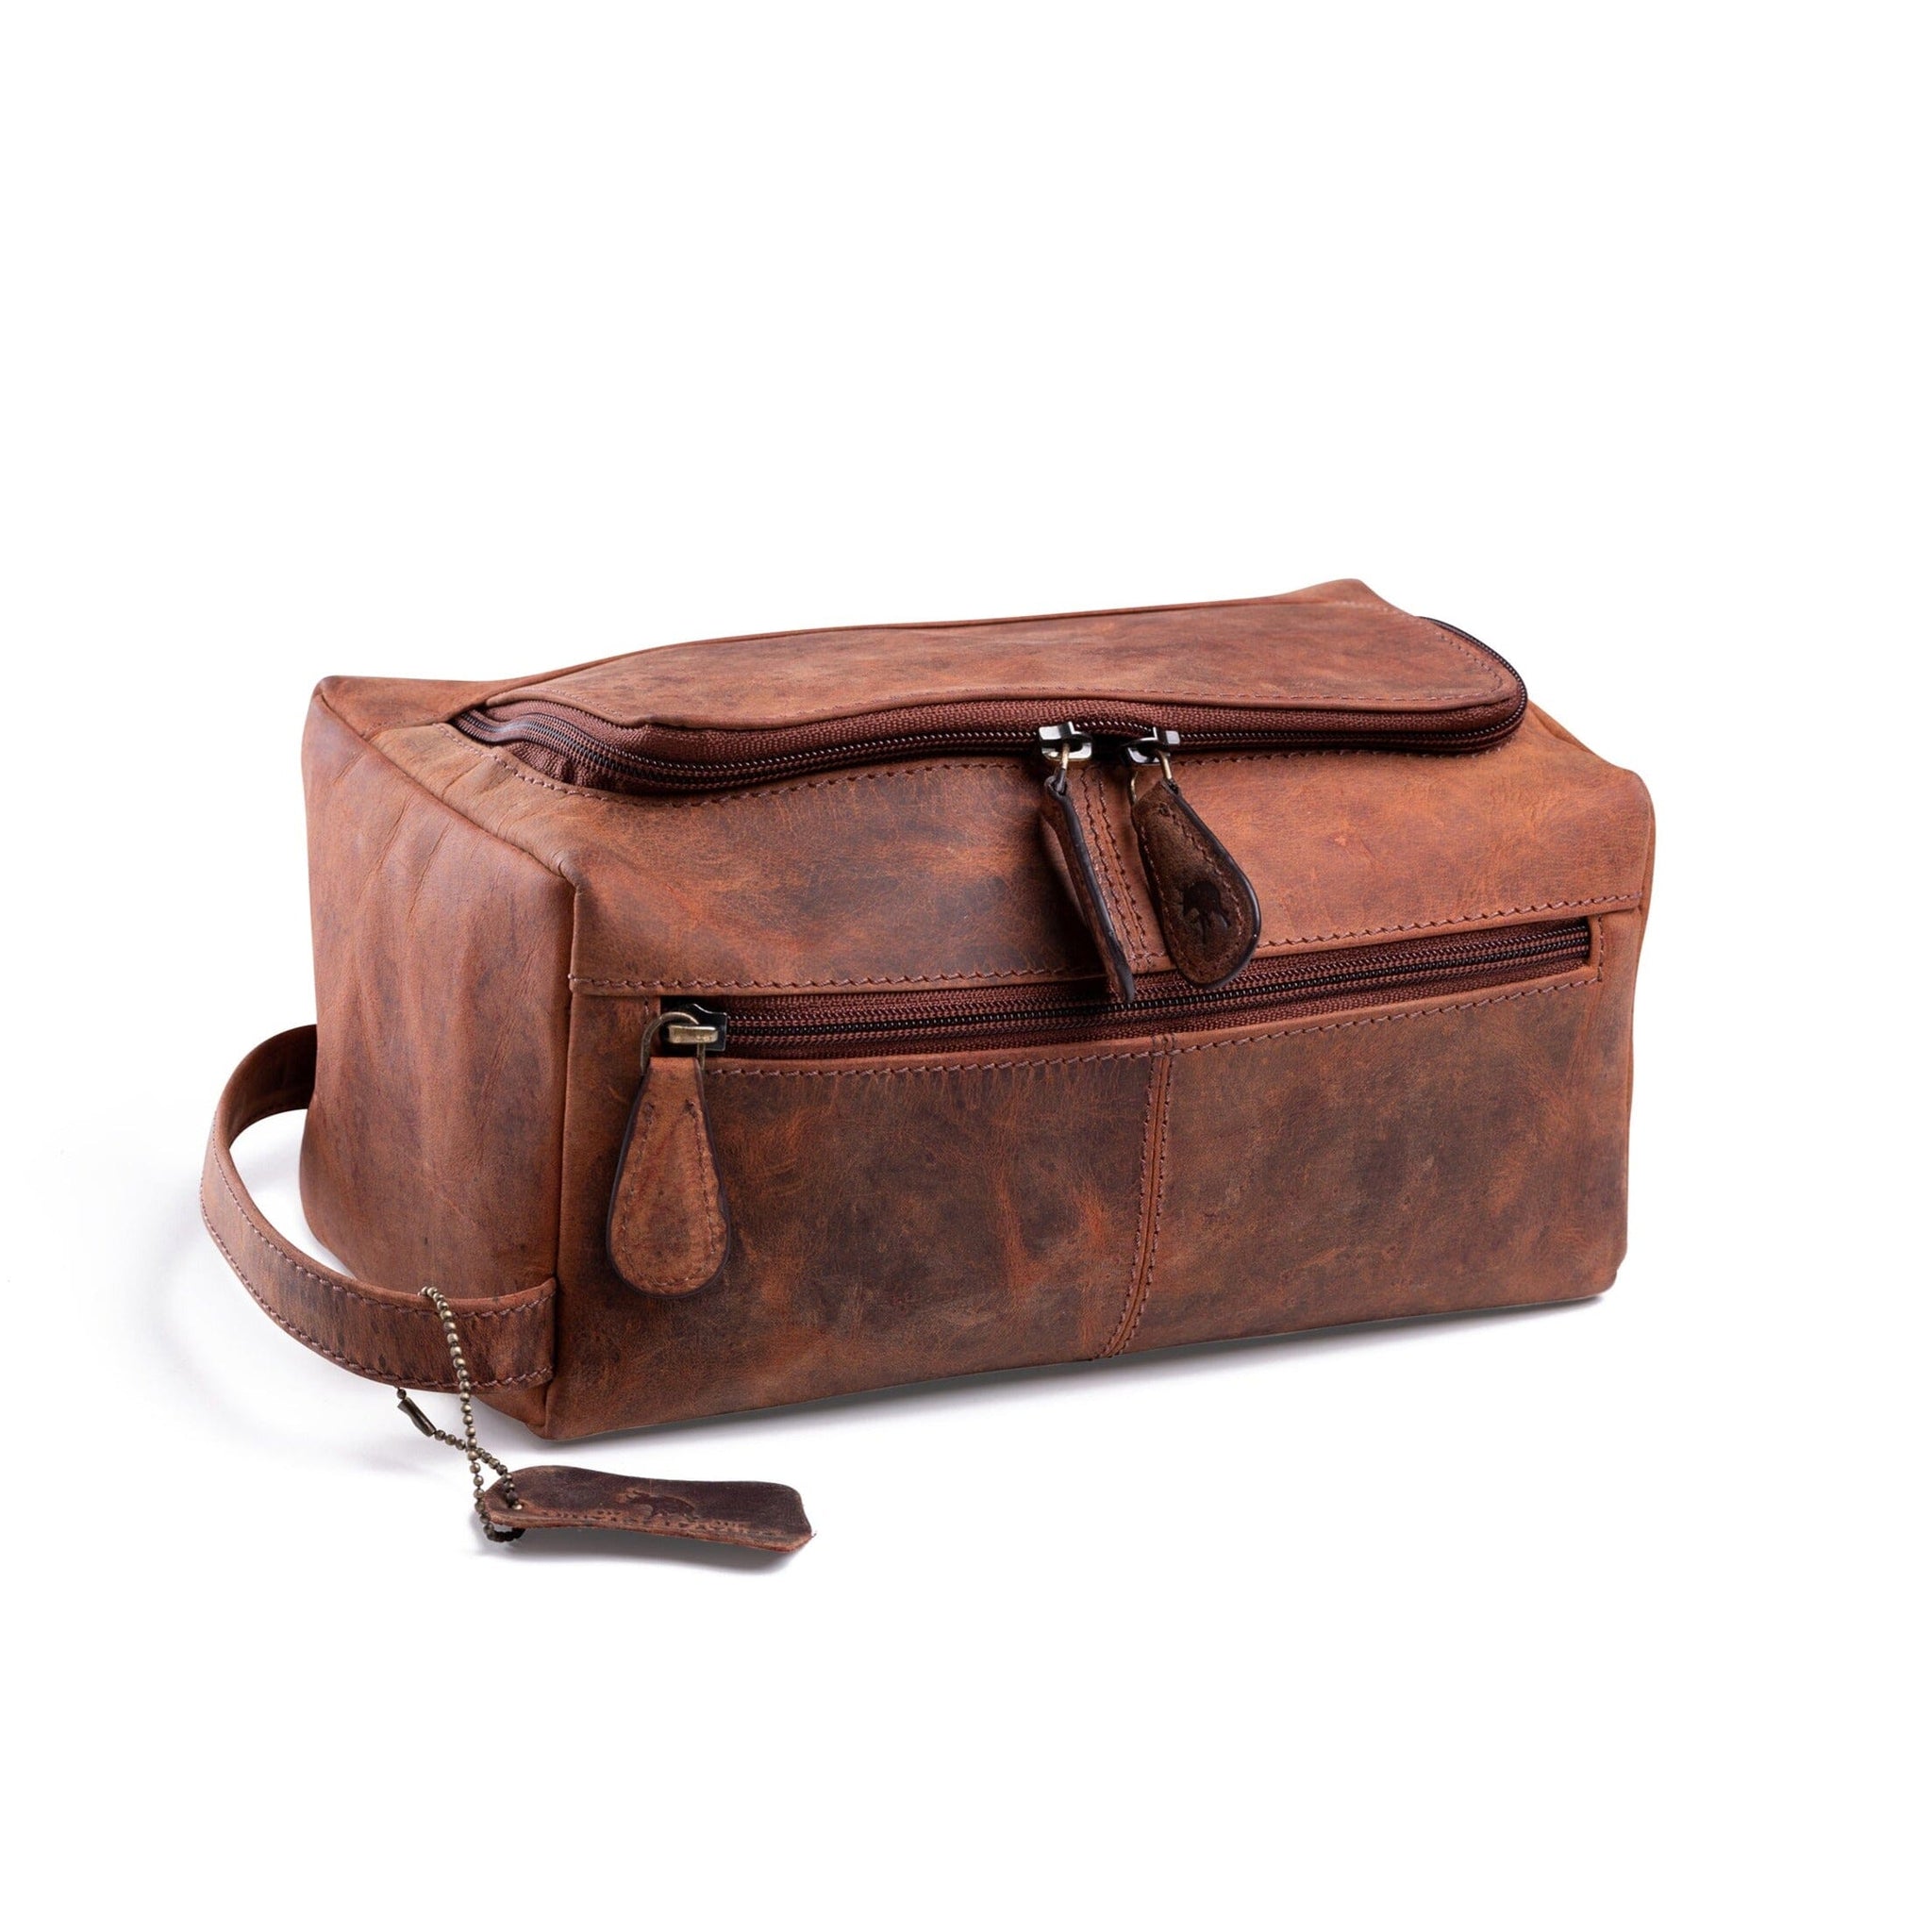 What is An Ideal Type of Leather Toiletry Bag For Men?